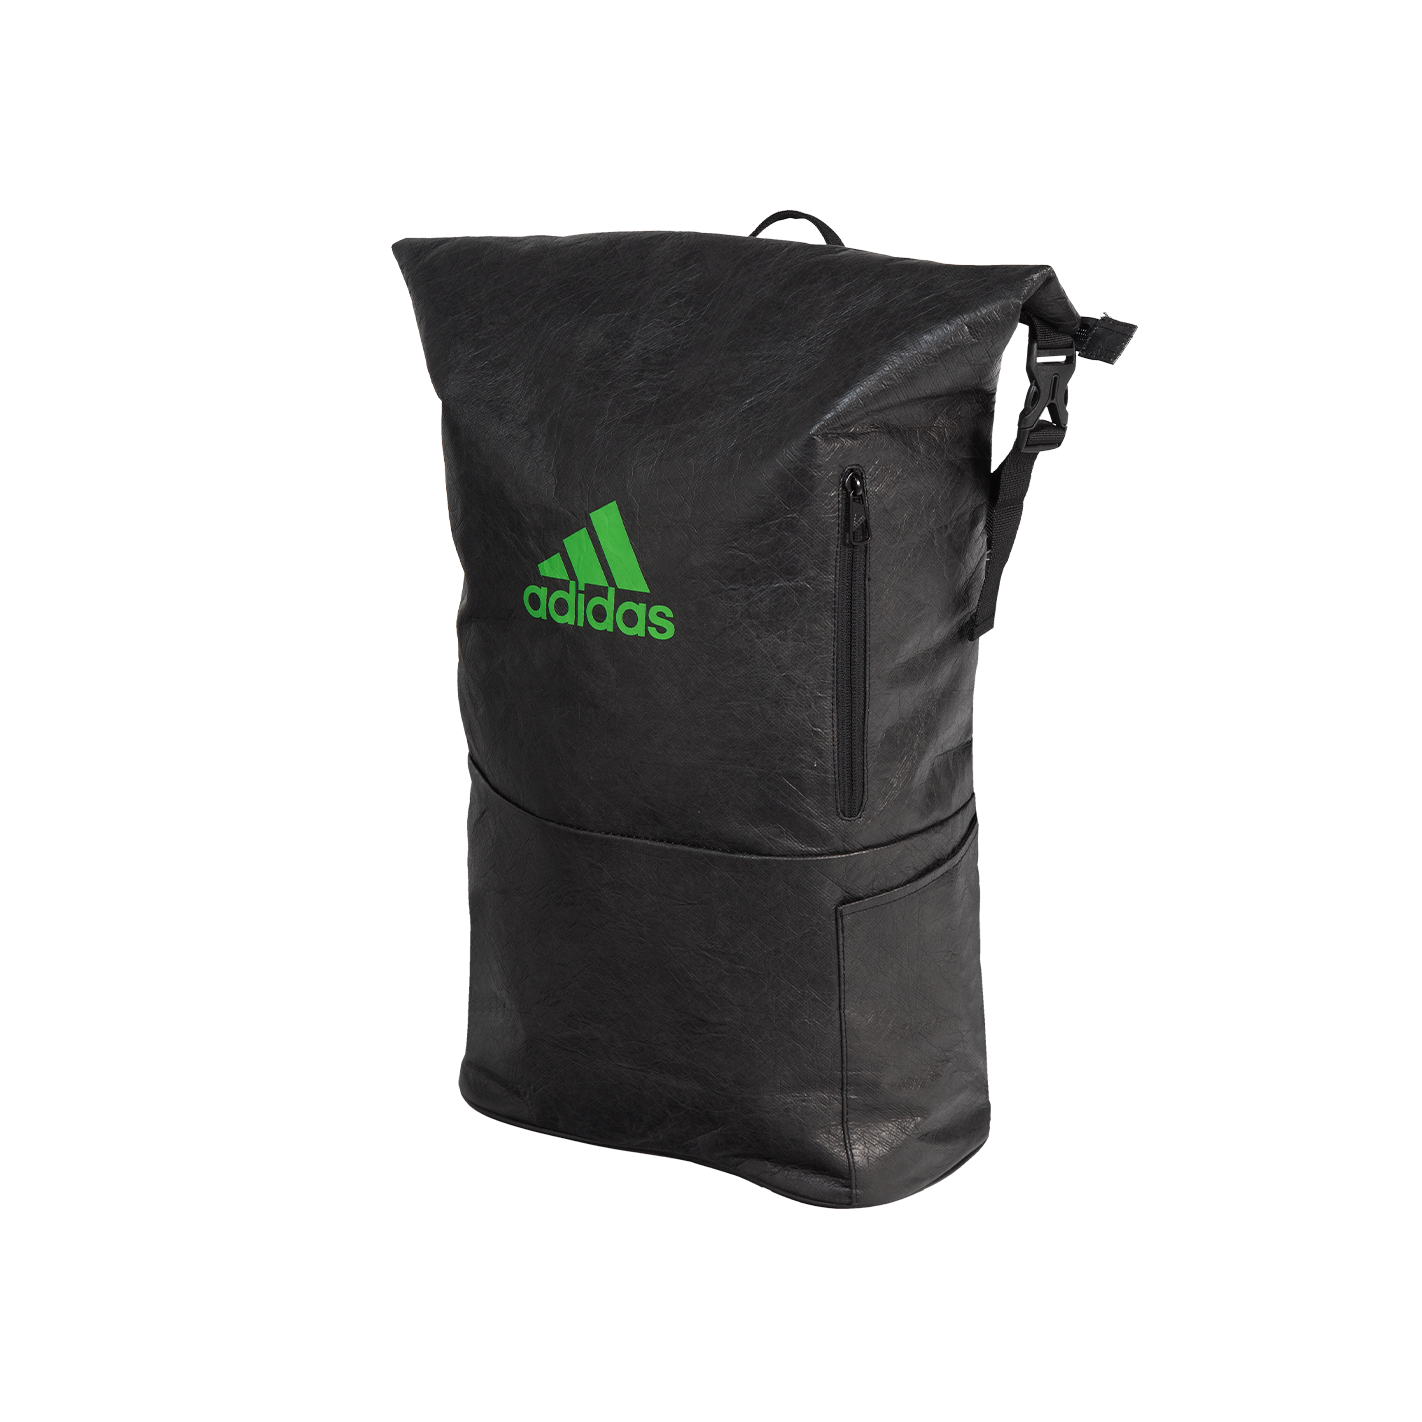 Backpack Multigame #Green Adidas